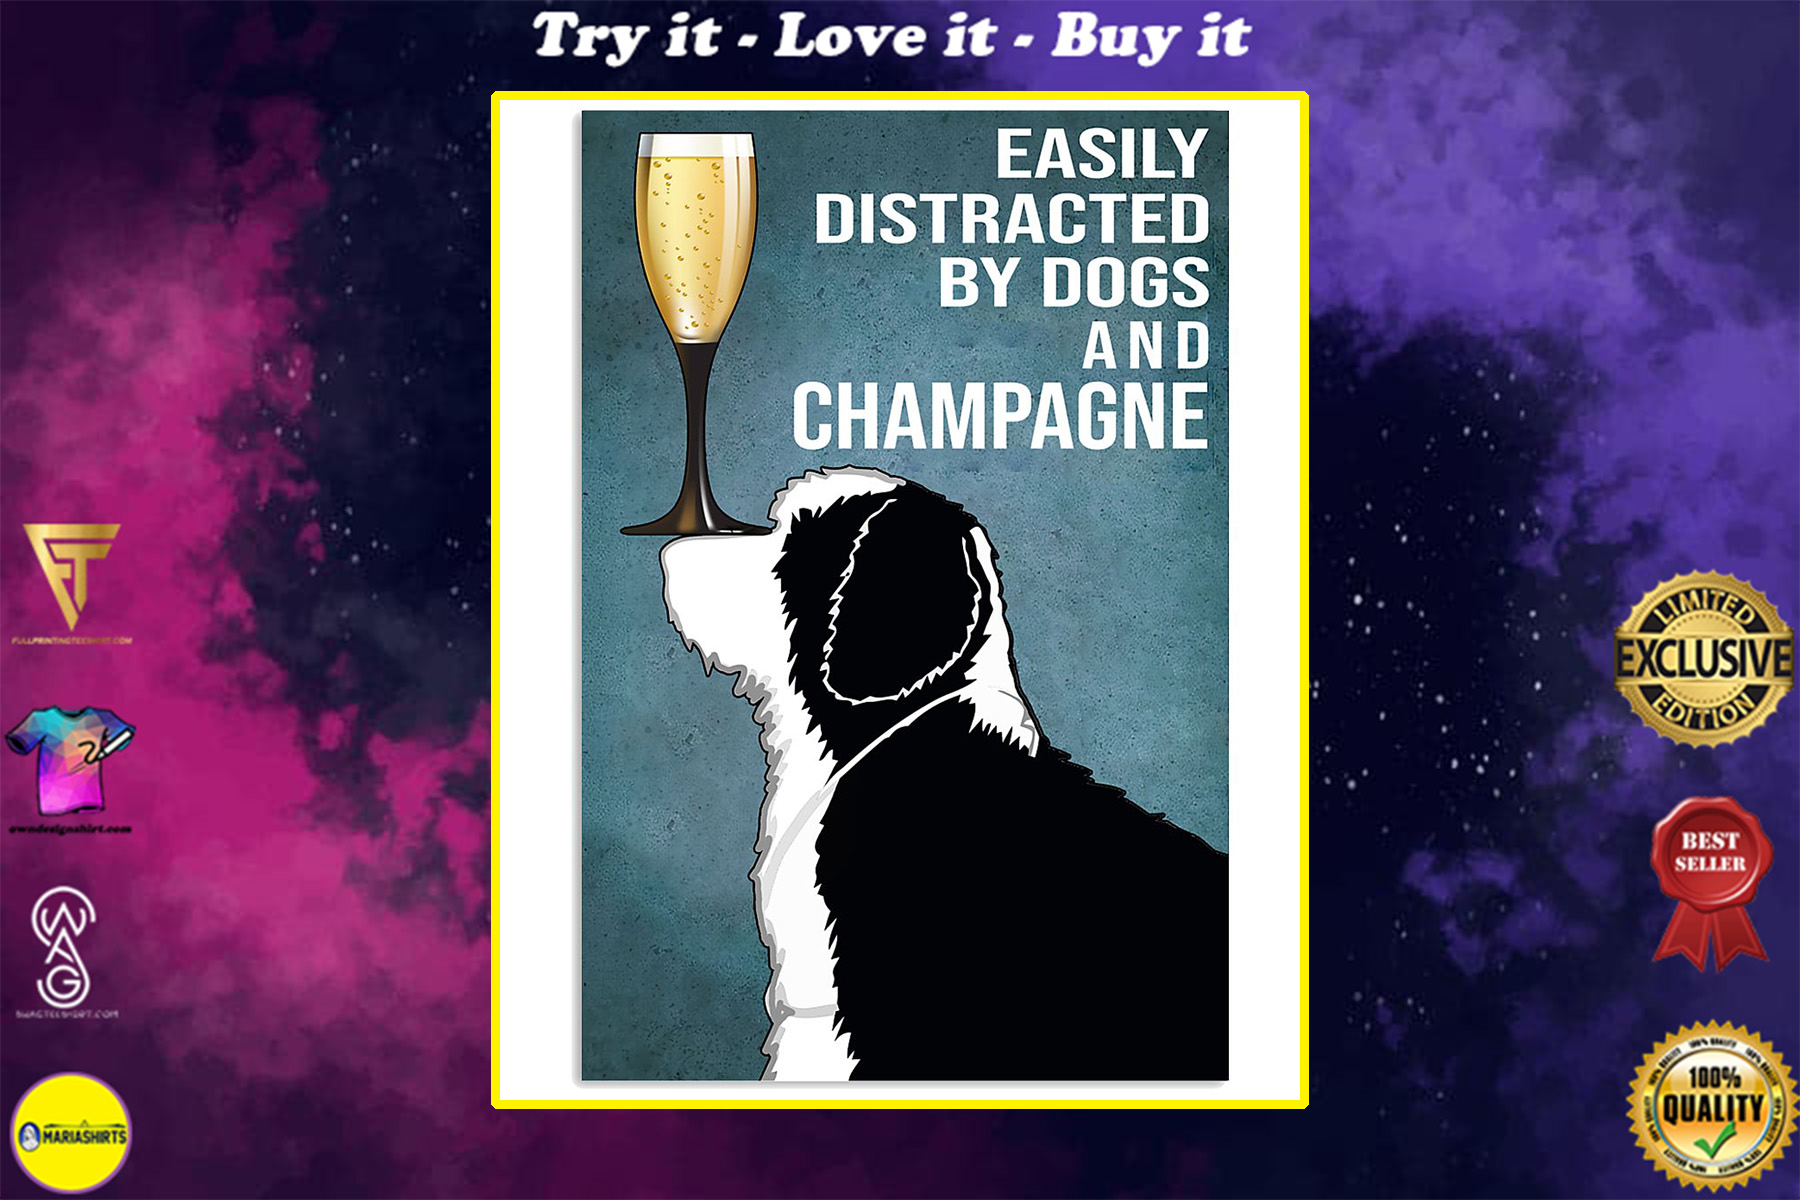 dog lover easily distracted by dogs and champagne poster